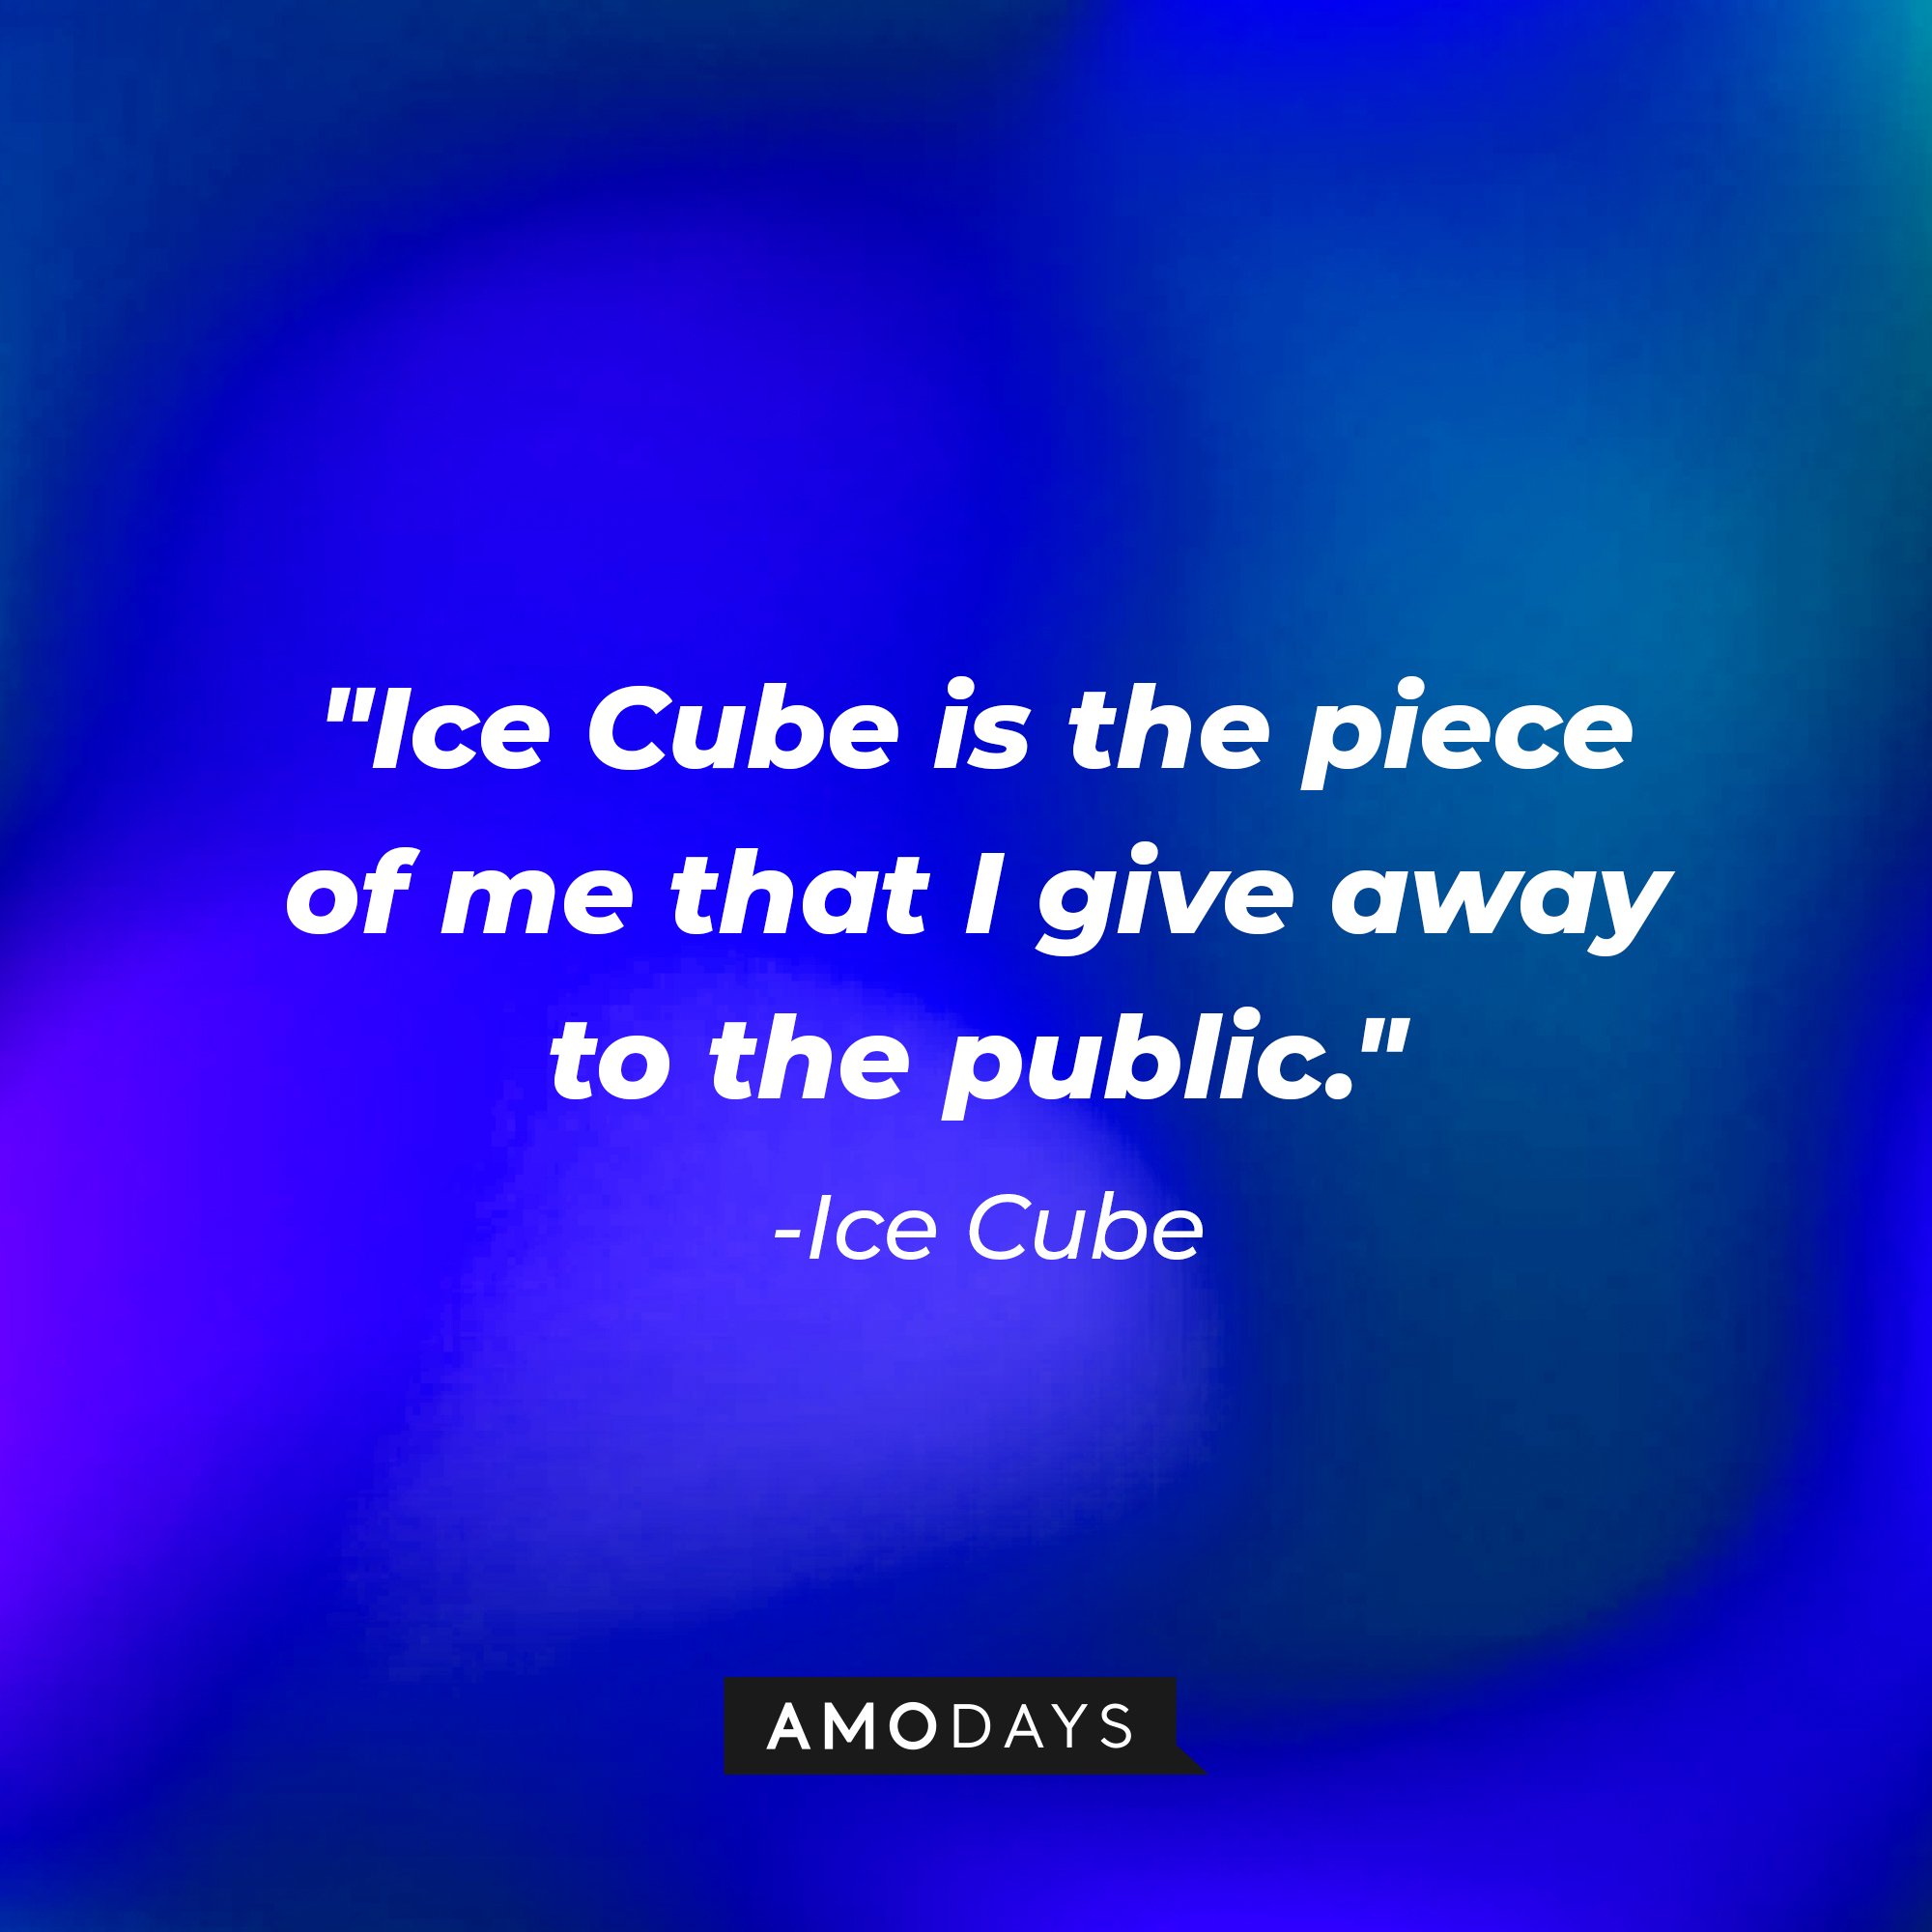 Ice Cube's quote: "Ice Cube is the piece of me that I give away to the public." — Ice Cube | Image: AmoDays